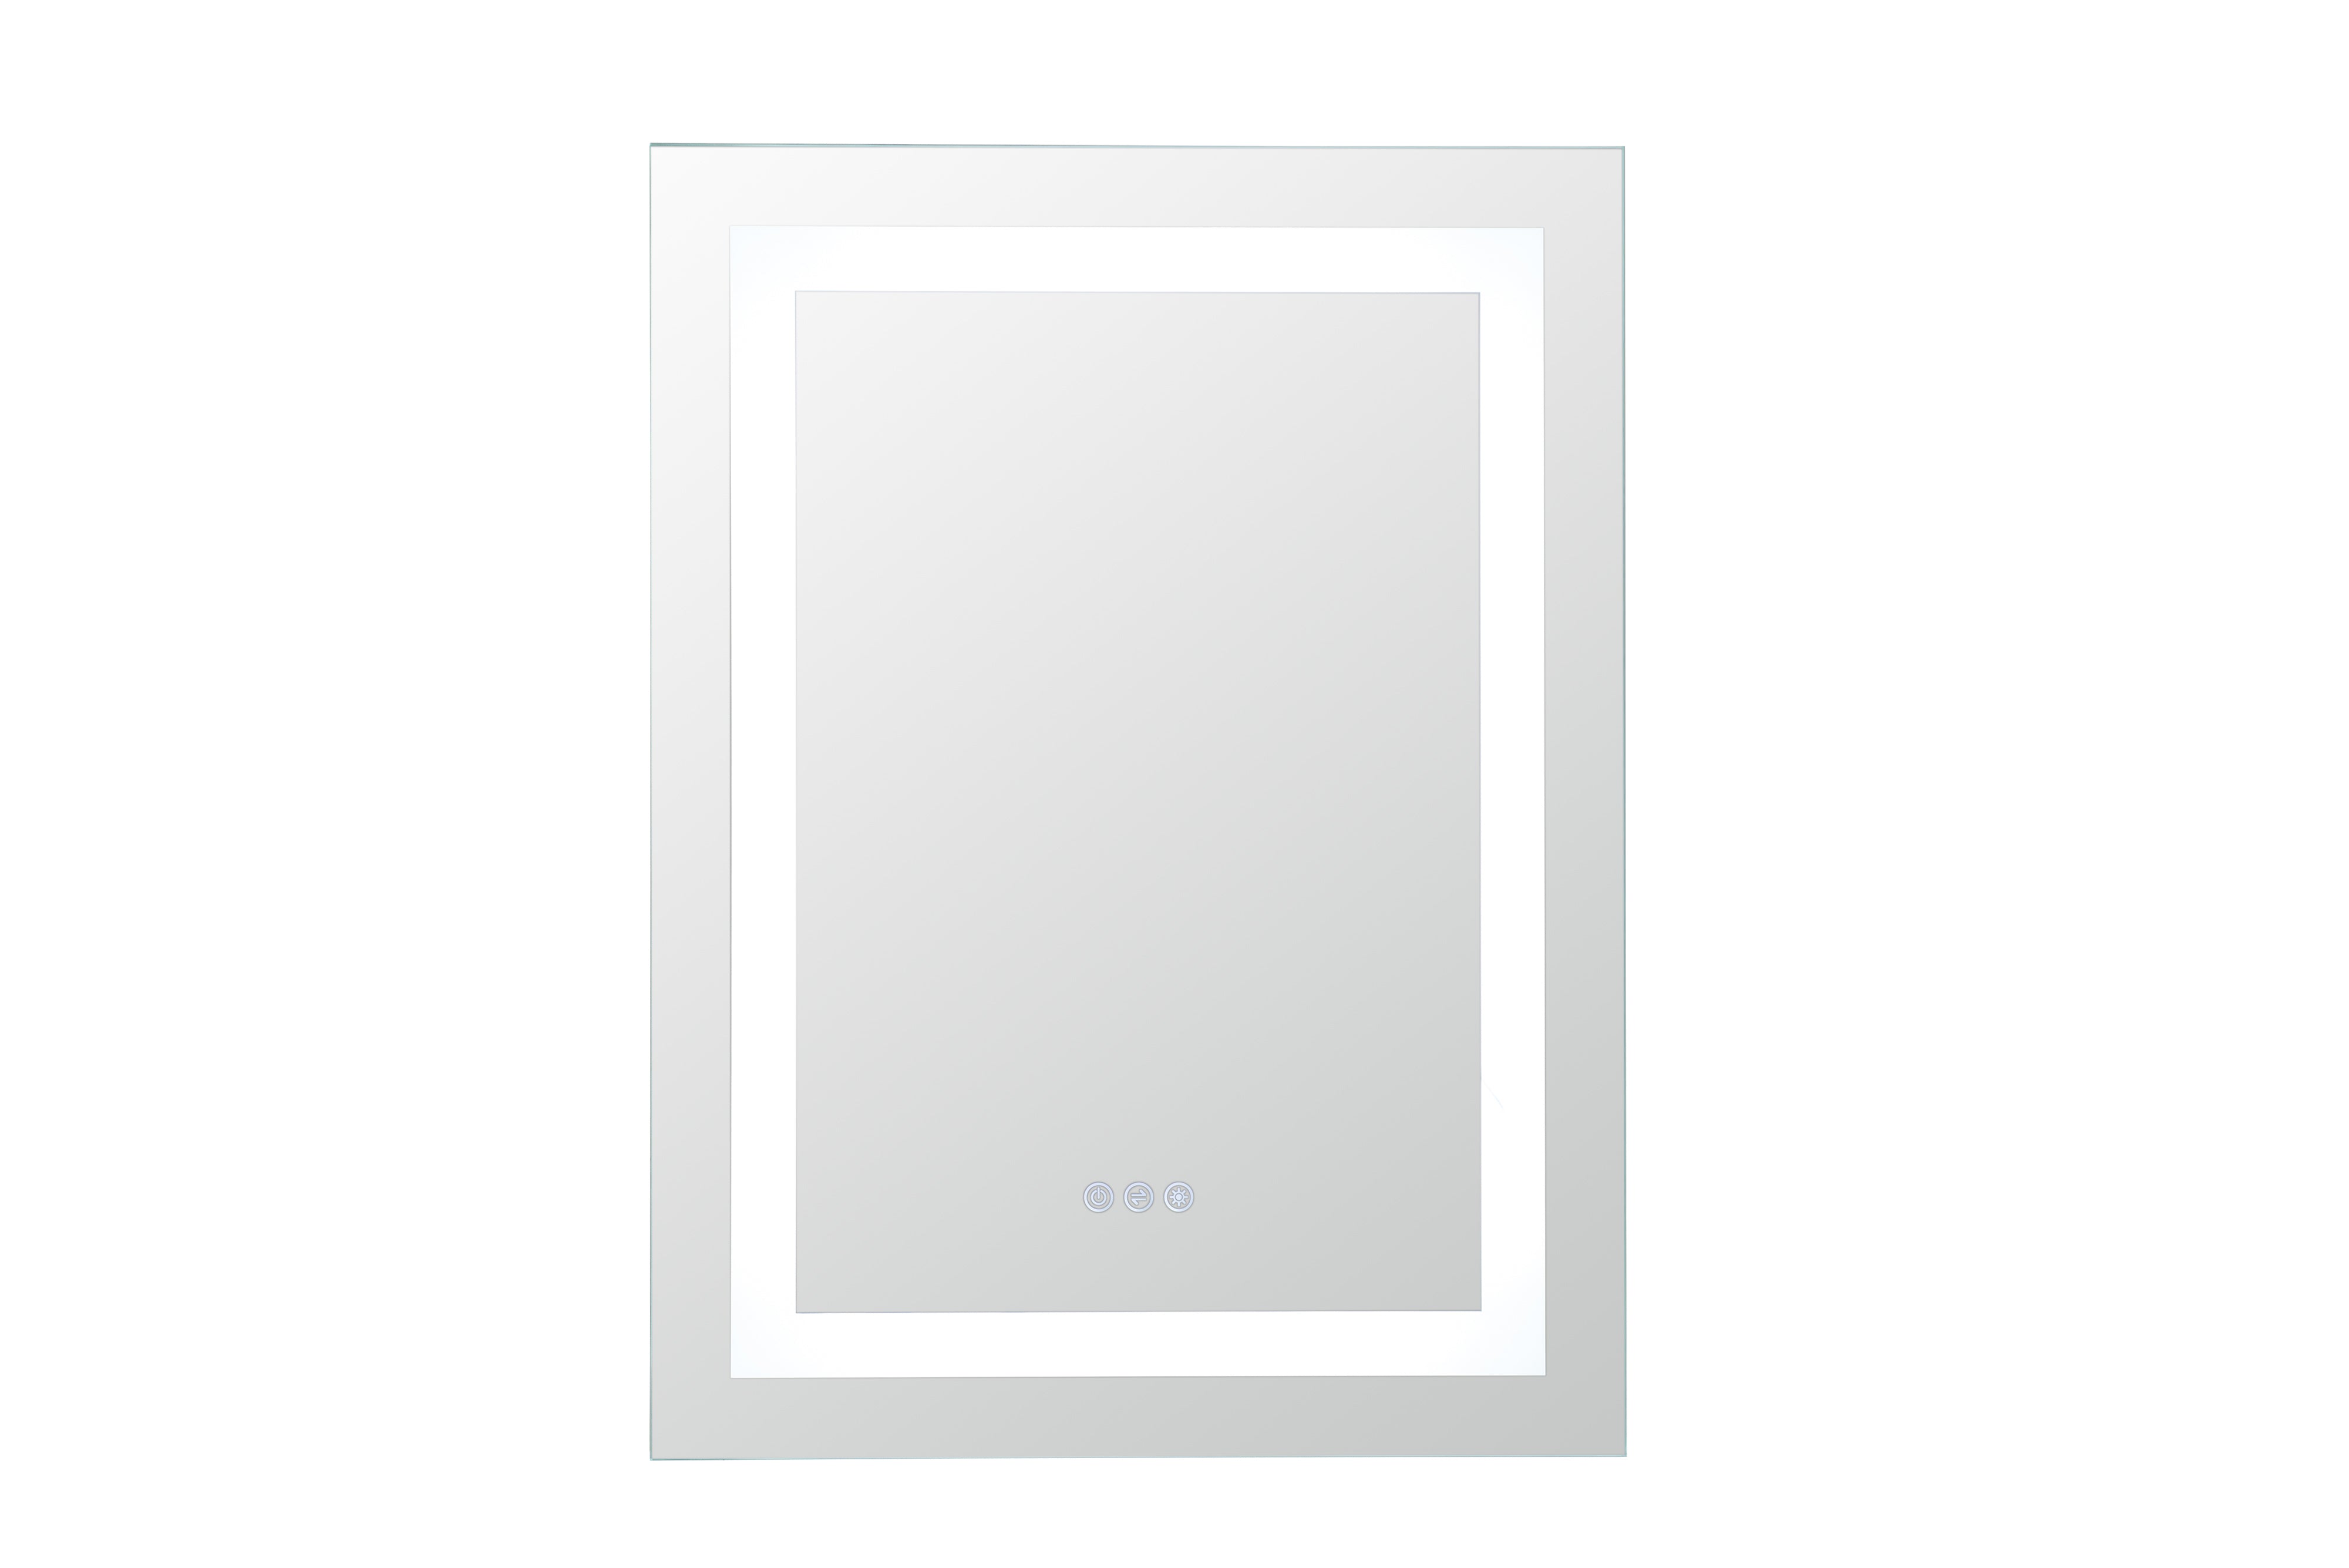 Sunjoy 30 in. x 36 in. Modern LED Bathroom Vanity Mirrors with Anti-Fog and Touch Dimmable Light